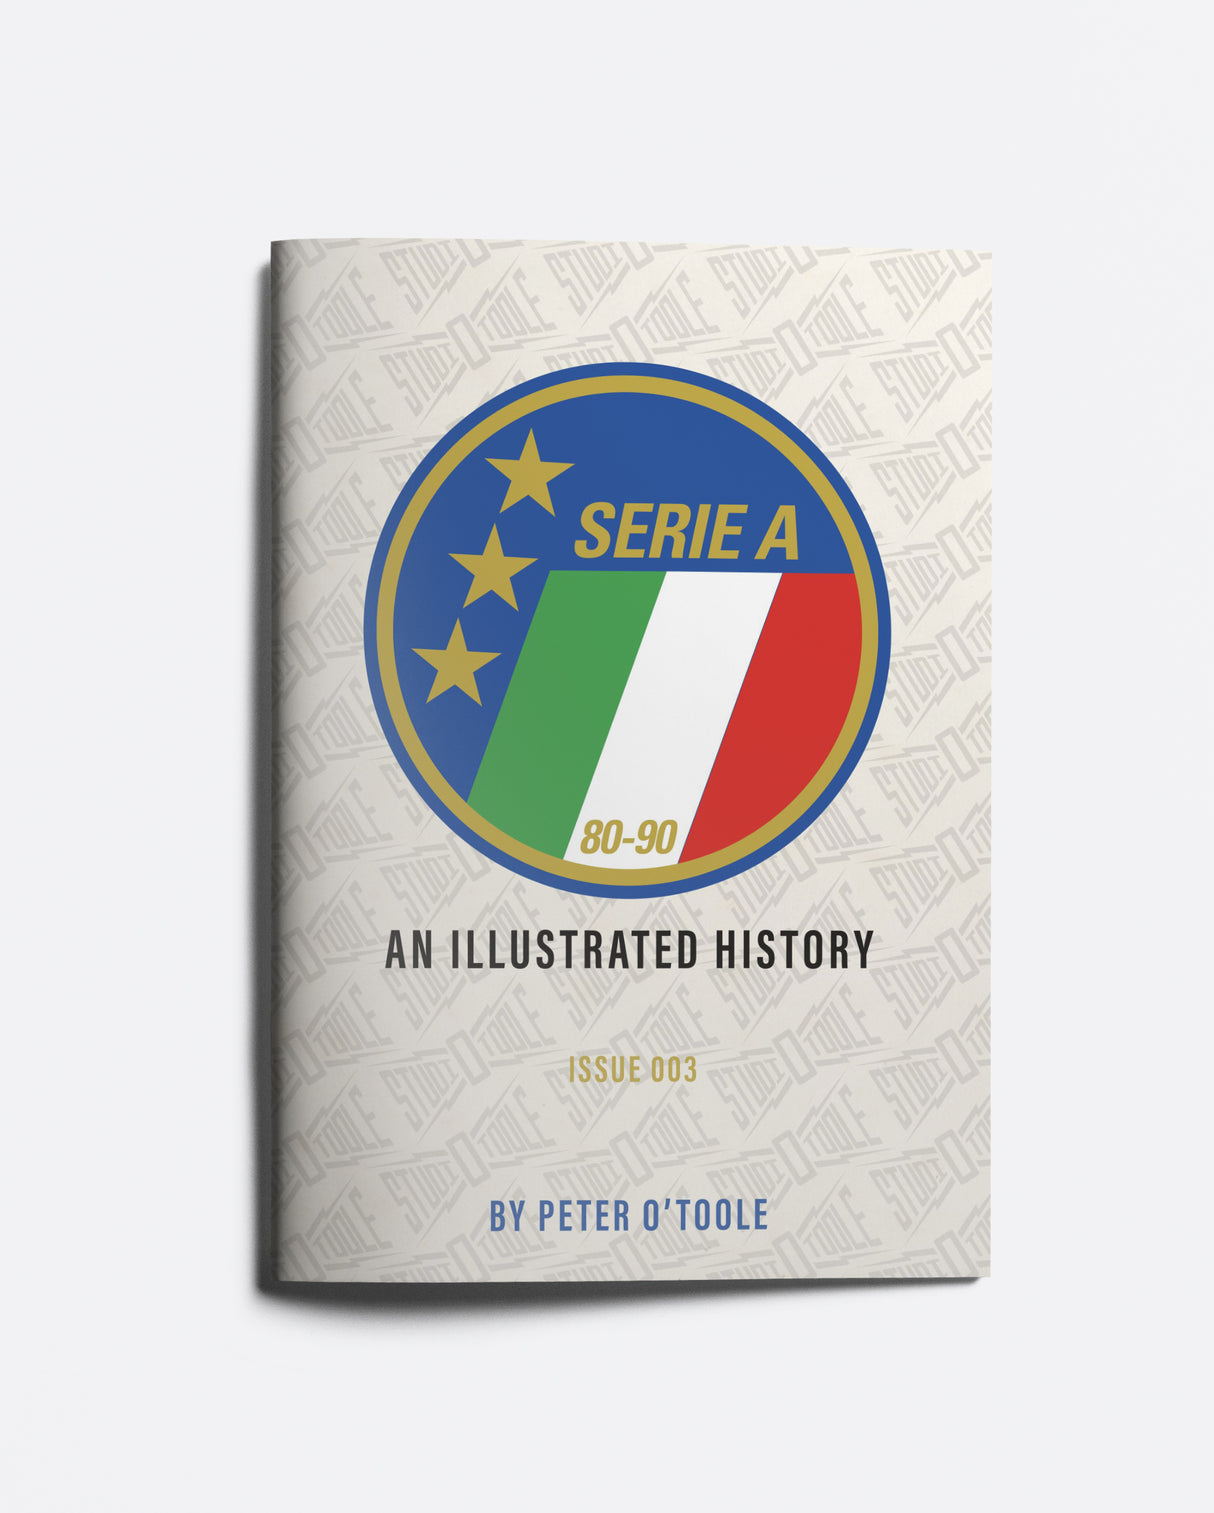 Serie A 1980–1990: An Illustrated History by Peter O'Toole